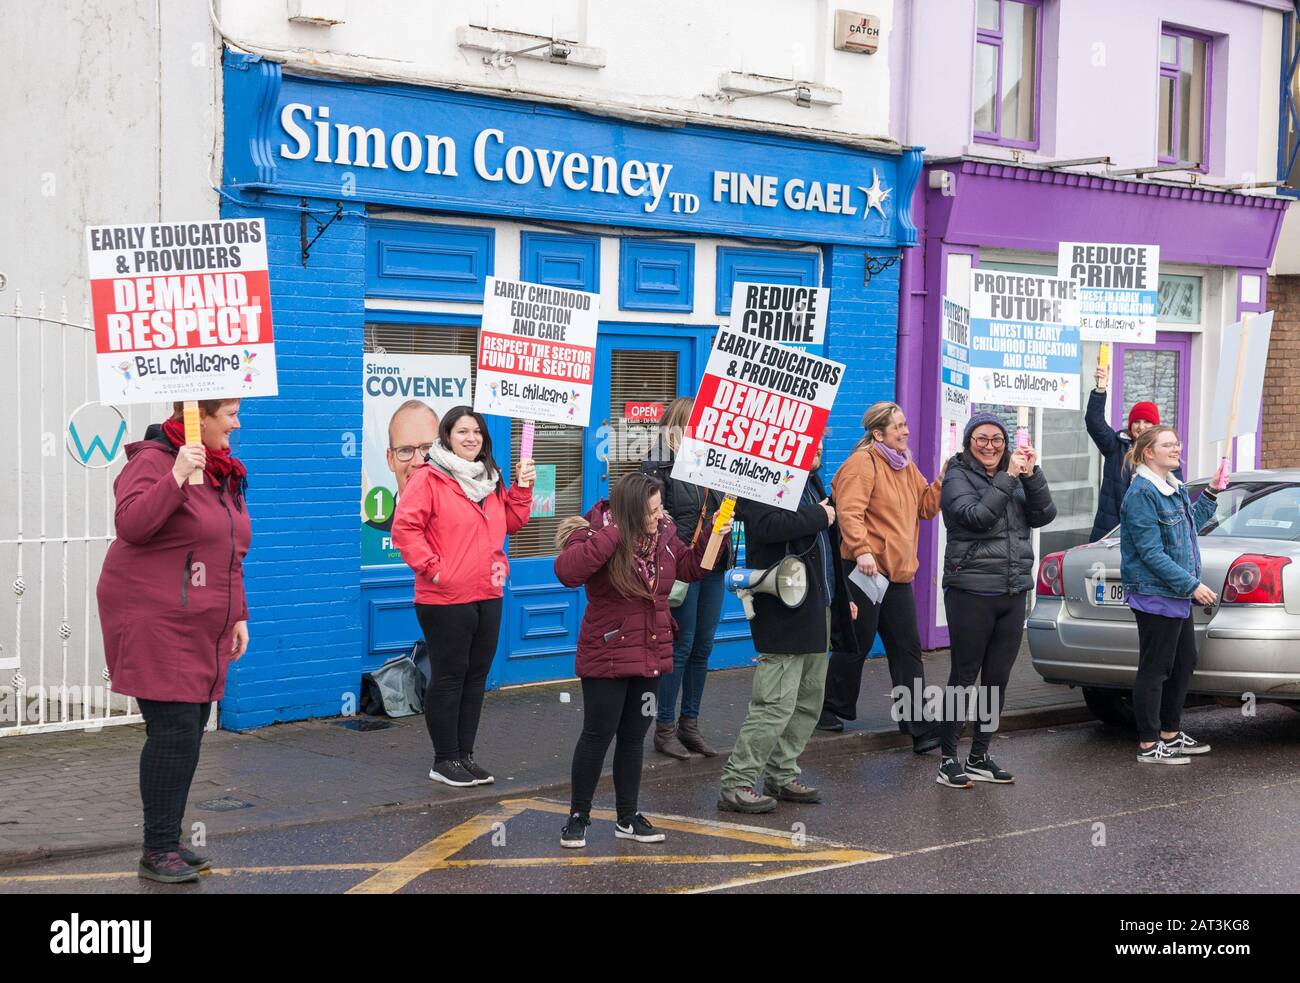 Carrigaline, Cork, Ireland. 30th January, 2020. Protesters repersenting parents and Childcare workers  outside the constituency office of Tánaiste, Mr. Simon Coveney, T.D. in support for increased funding for the childcare providers sector in Carrigaline, Co. Cork, Ireland. -Credit; David Creedon / Alamy Live News Stock Photo